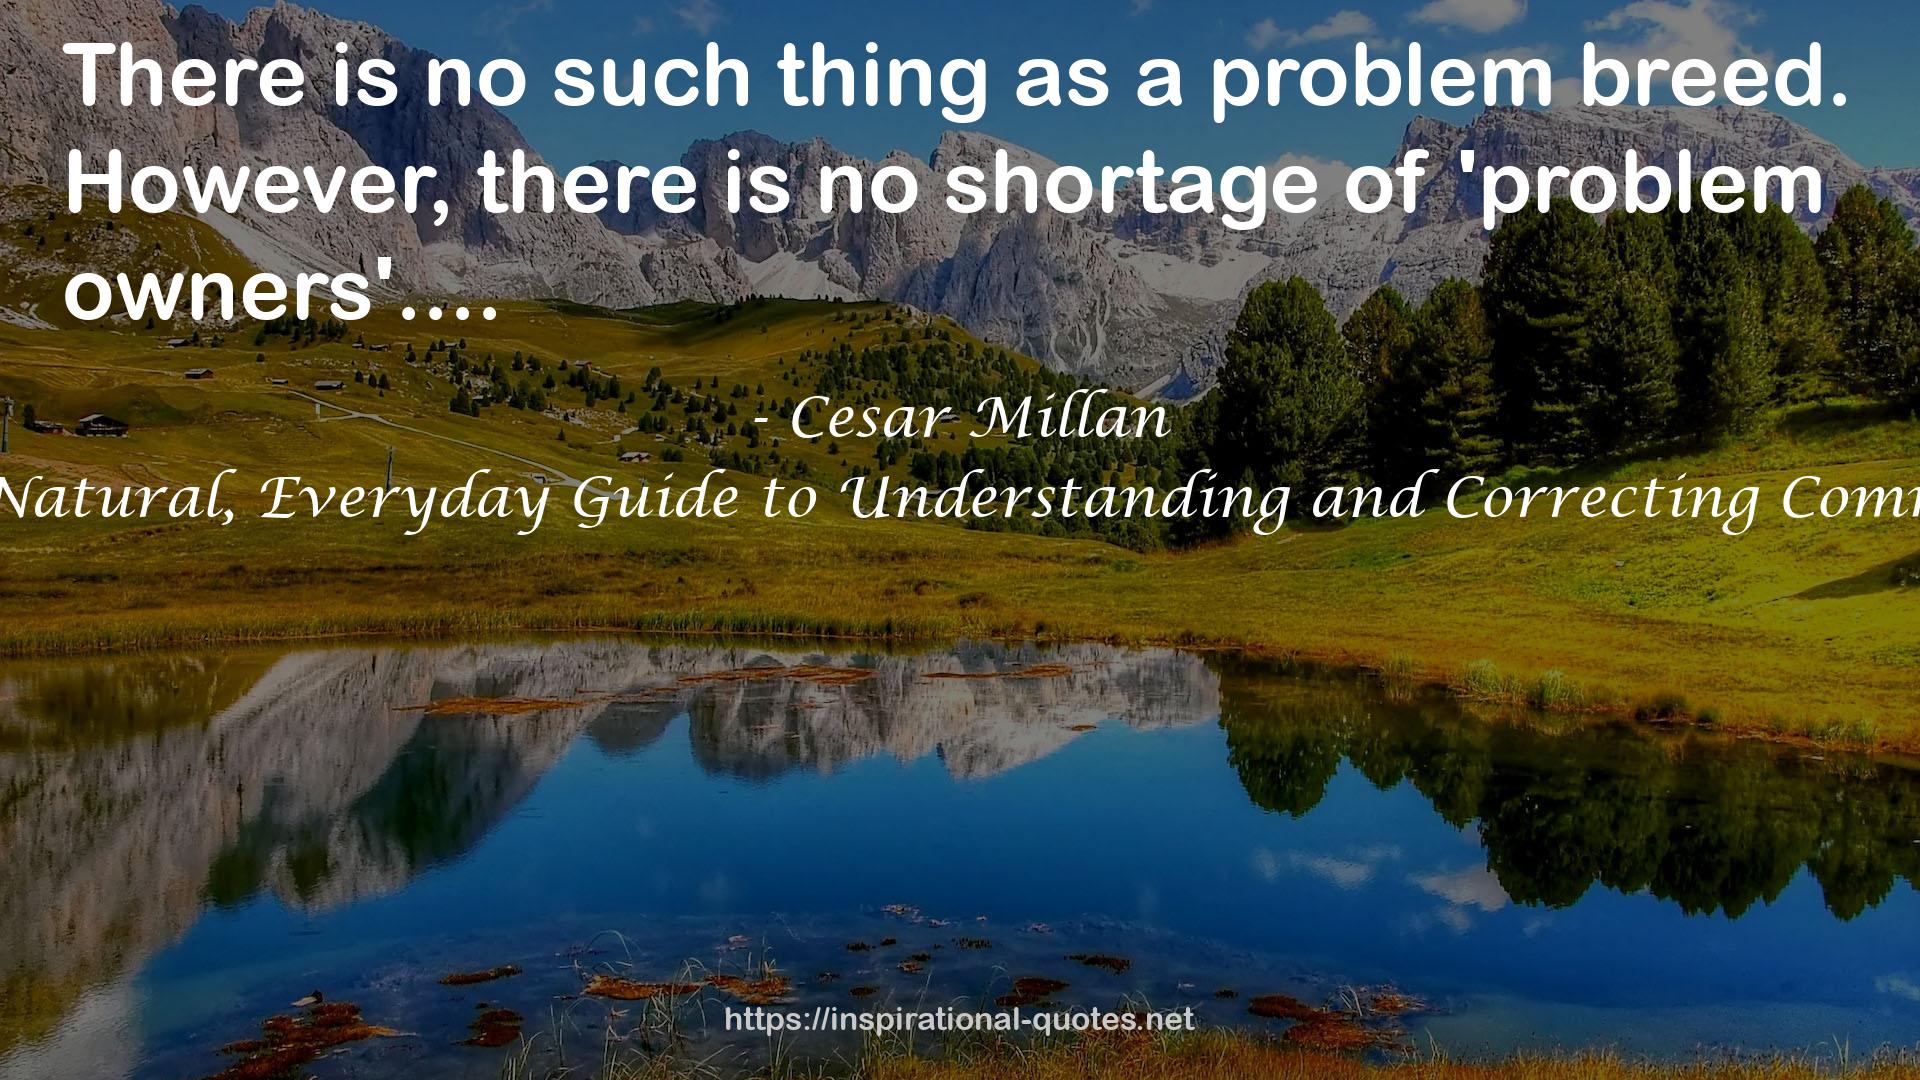 Cesar's Way: The Natural, Everyday Guide to Understanding and Correcting Common Dog Problems QUOTES